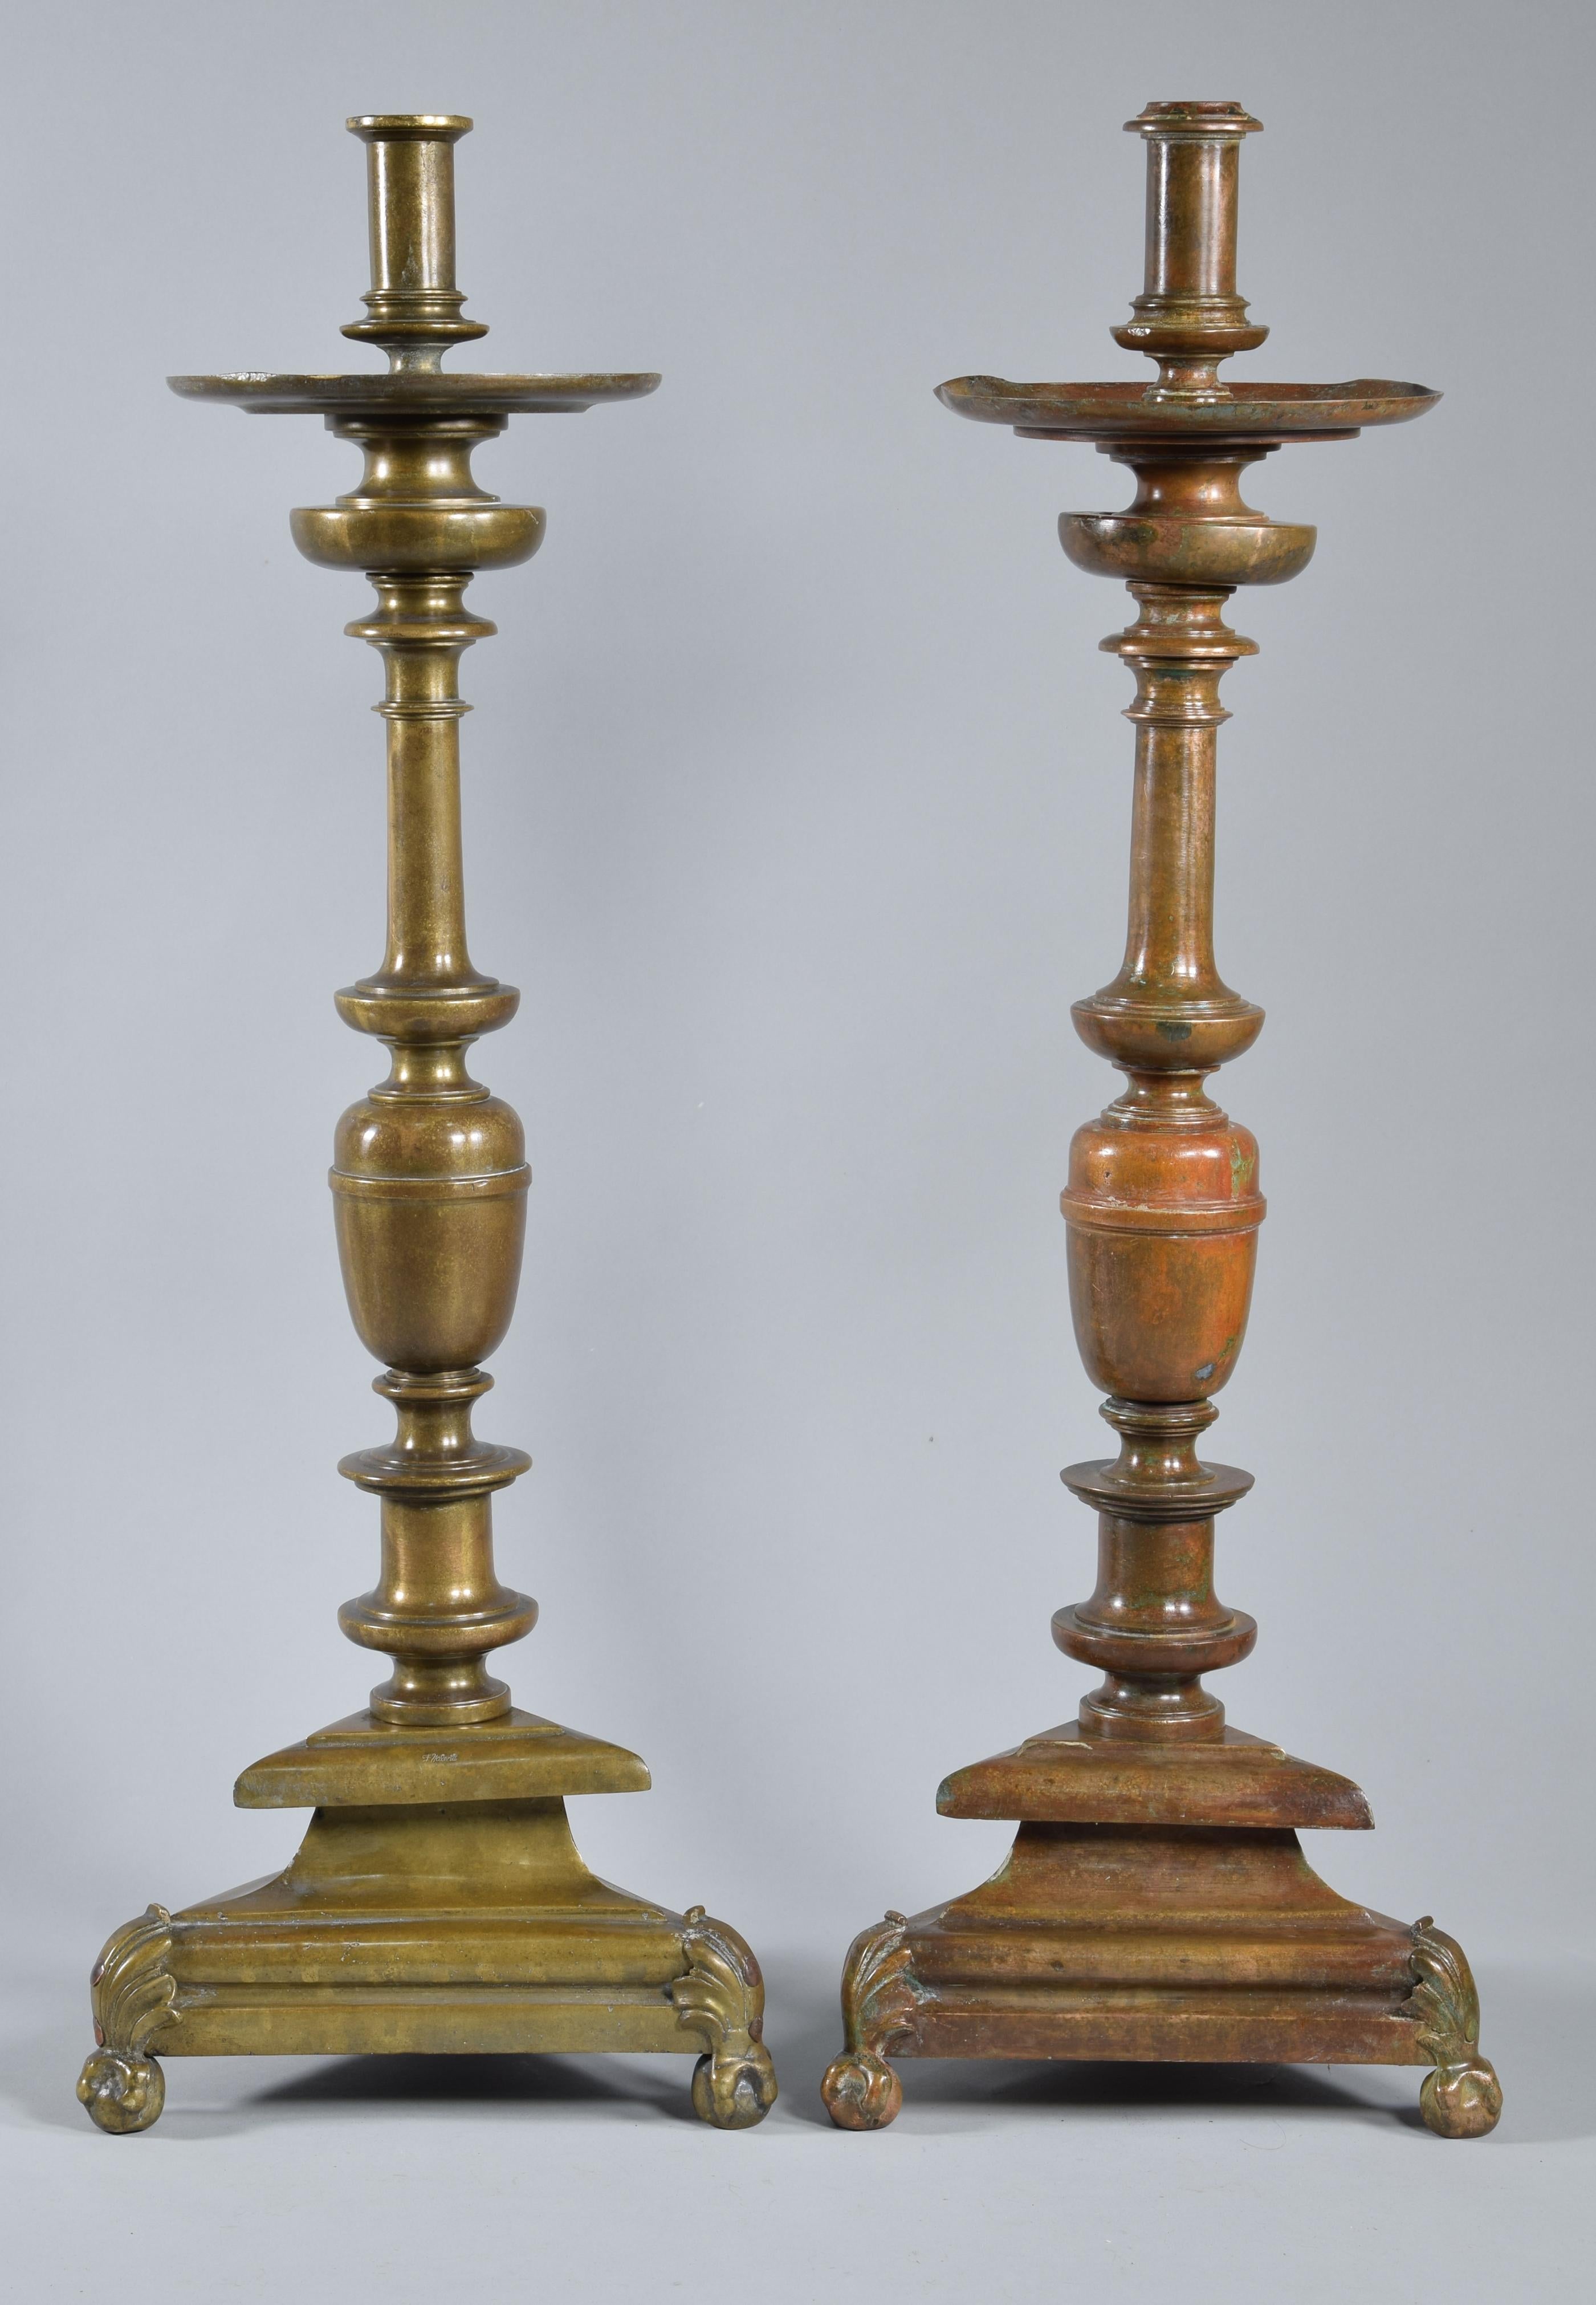 Bronze Candle Holders Pair, 20th Century, after Antique Models In Fair Condition For Sale In Madrid, ES